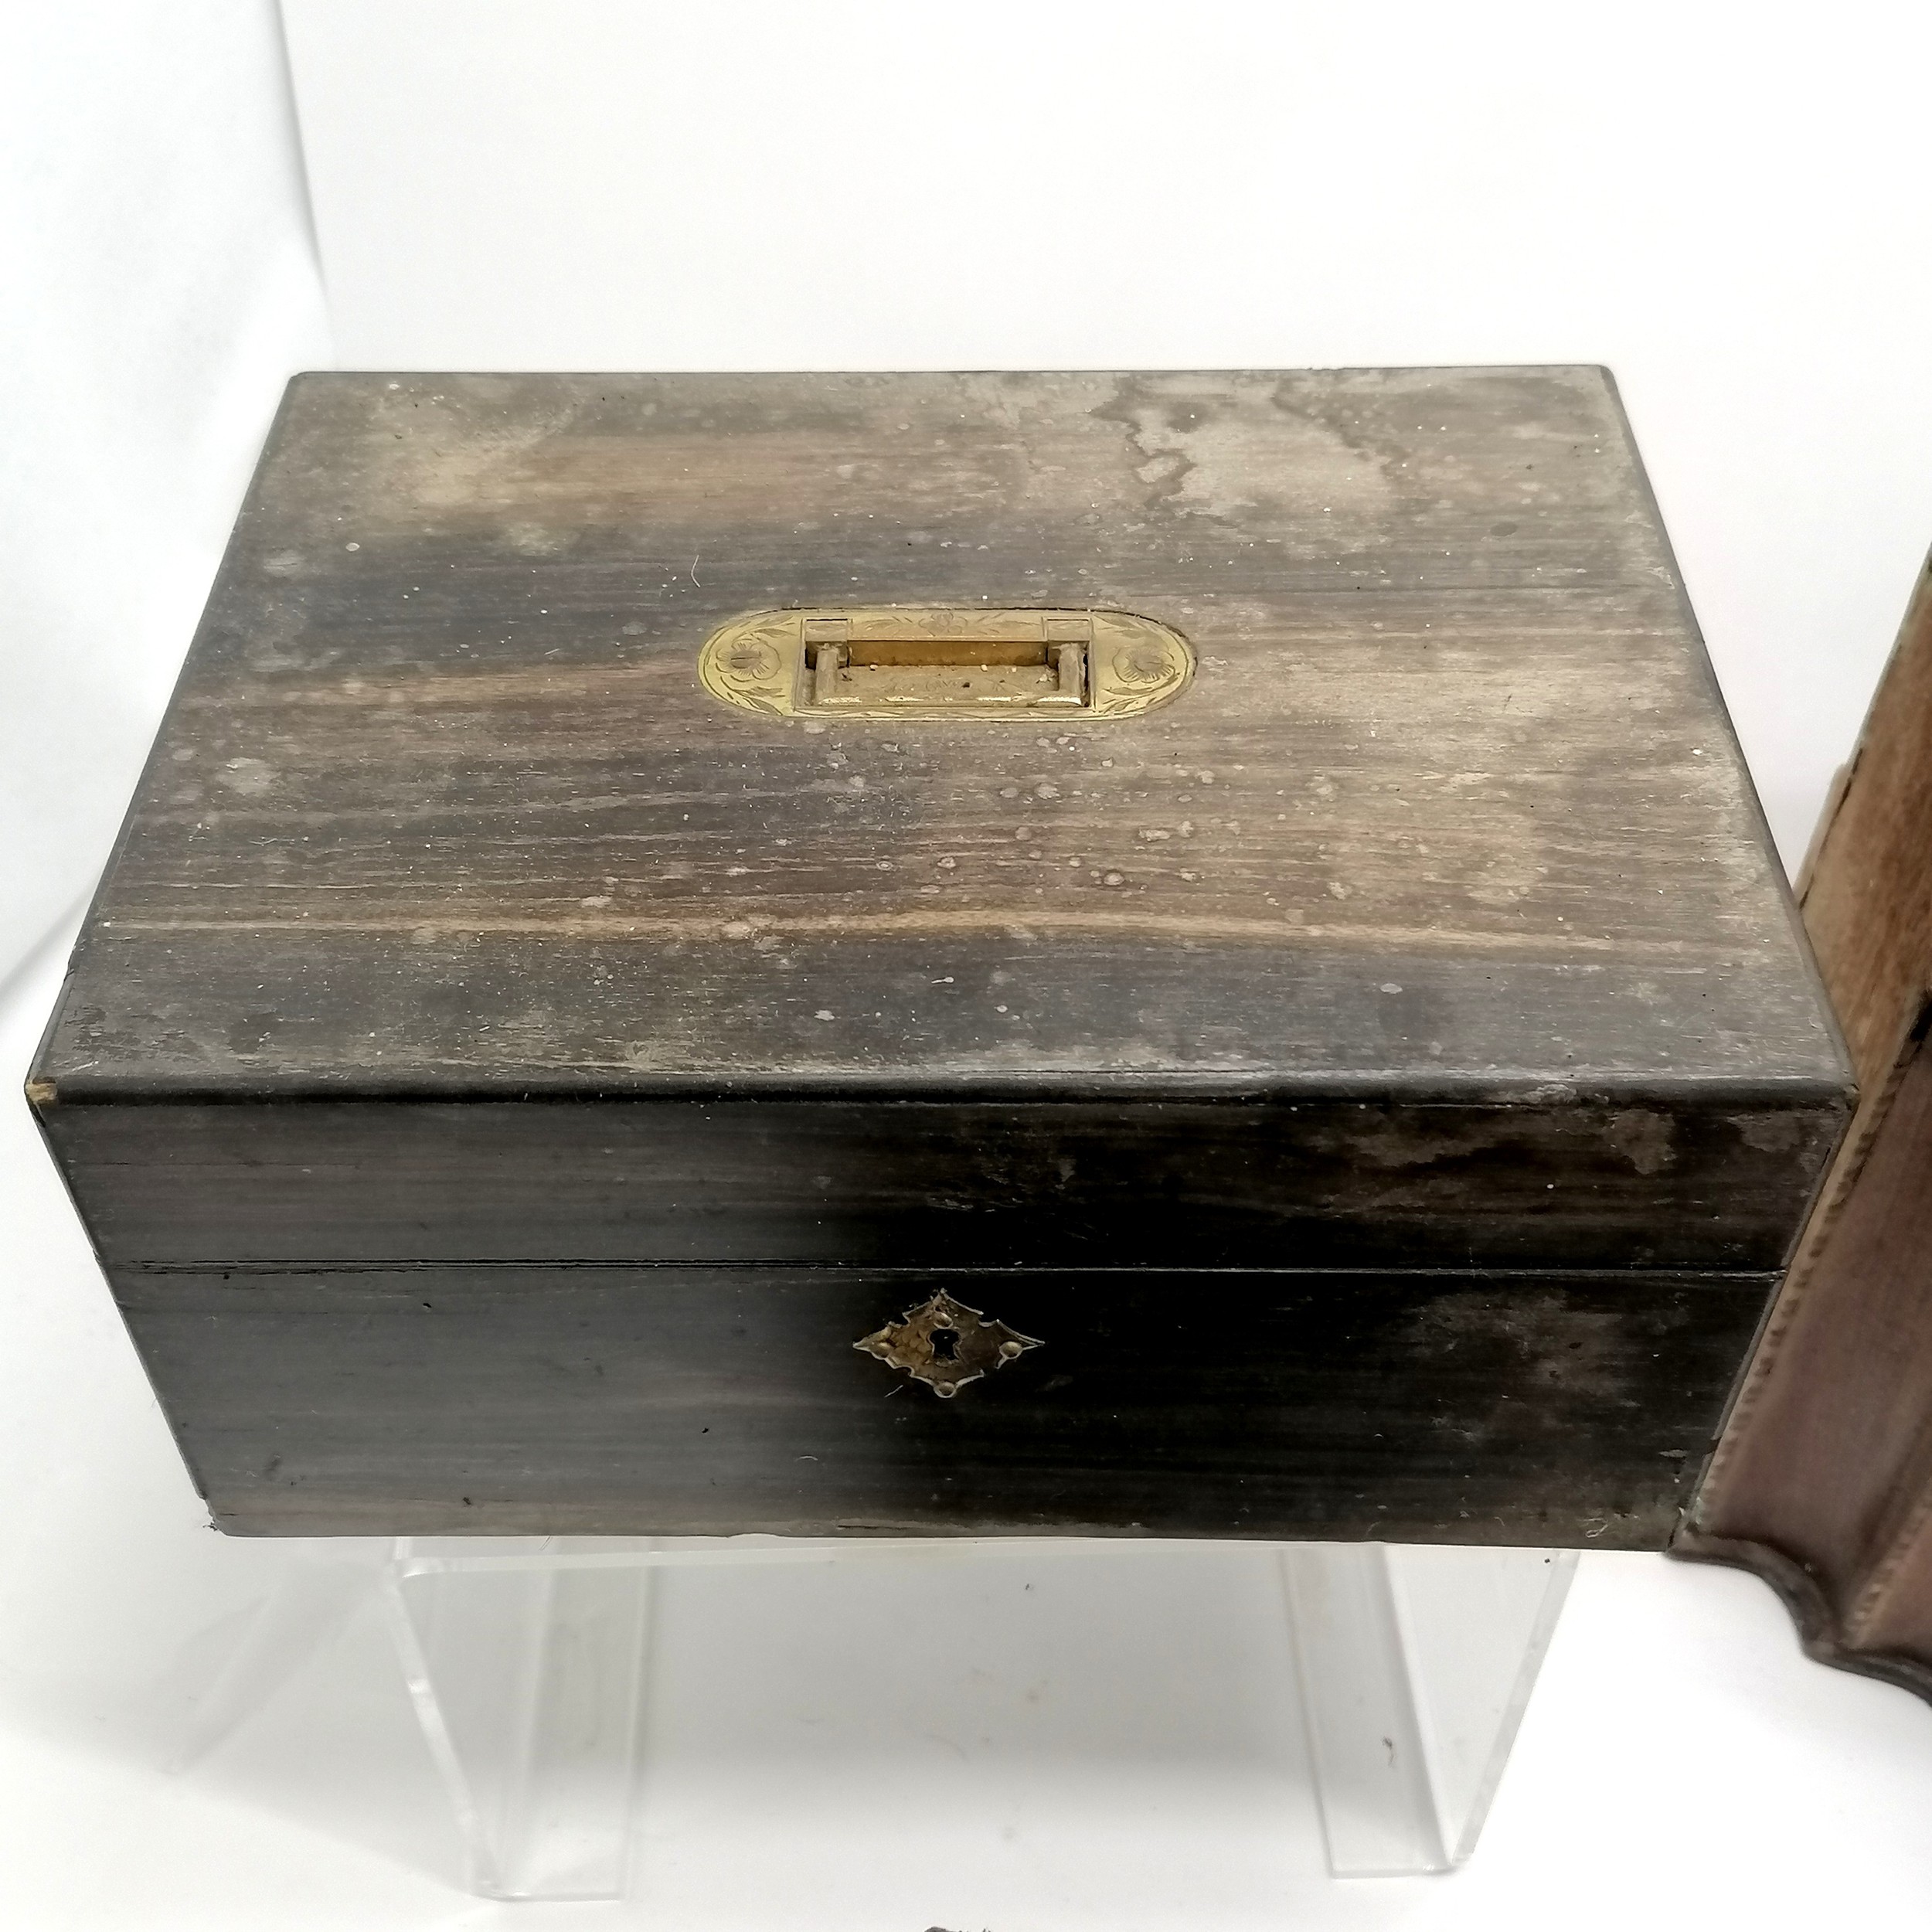 4 antique boxes incl. converted Georgian knife box 34cm high x 23cm x 18cm deep - all for - Image 3 of 6